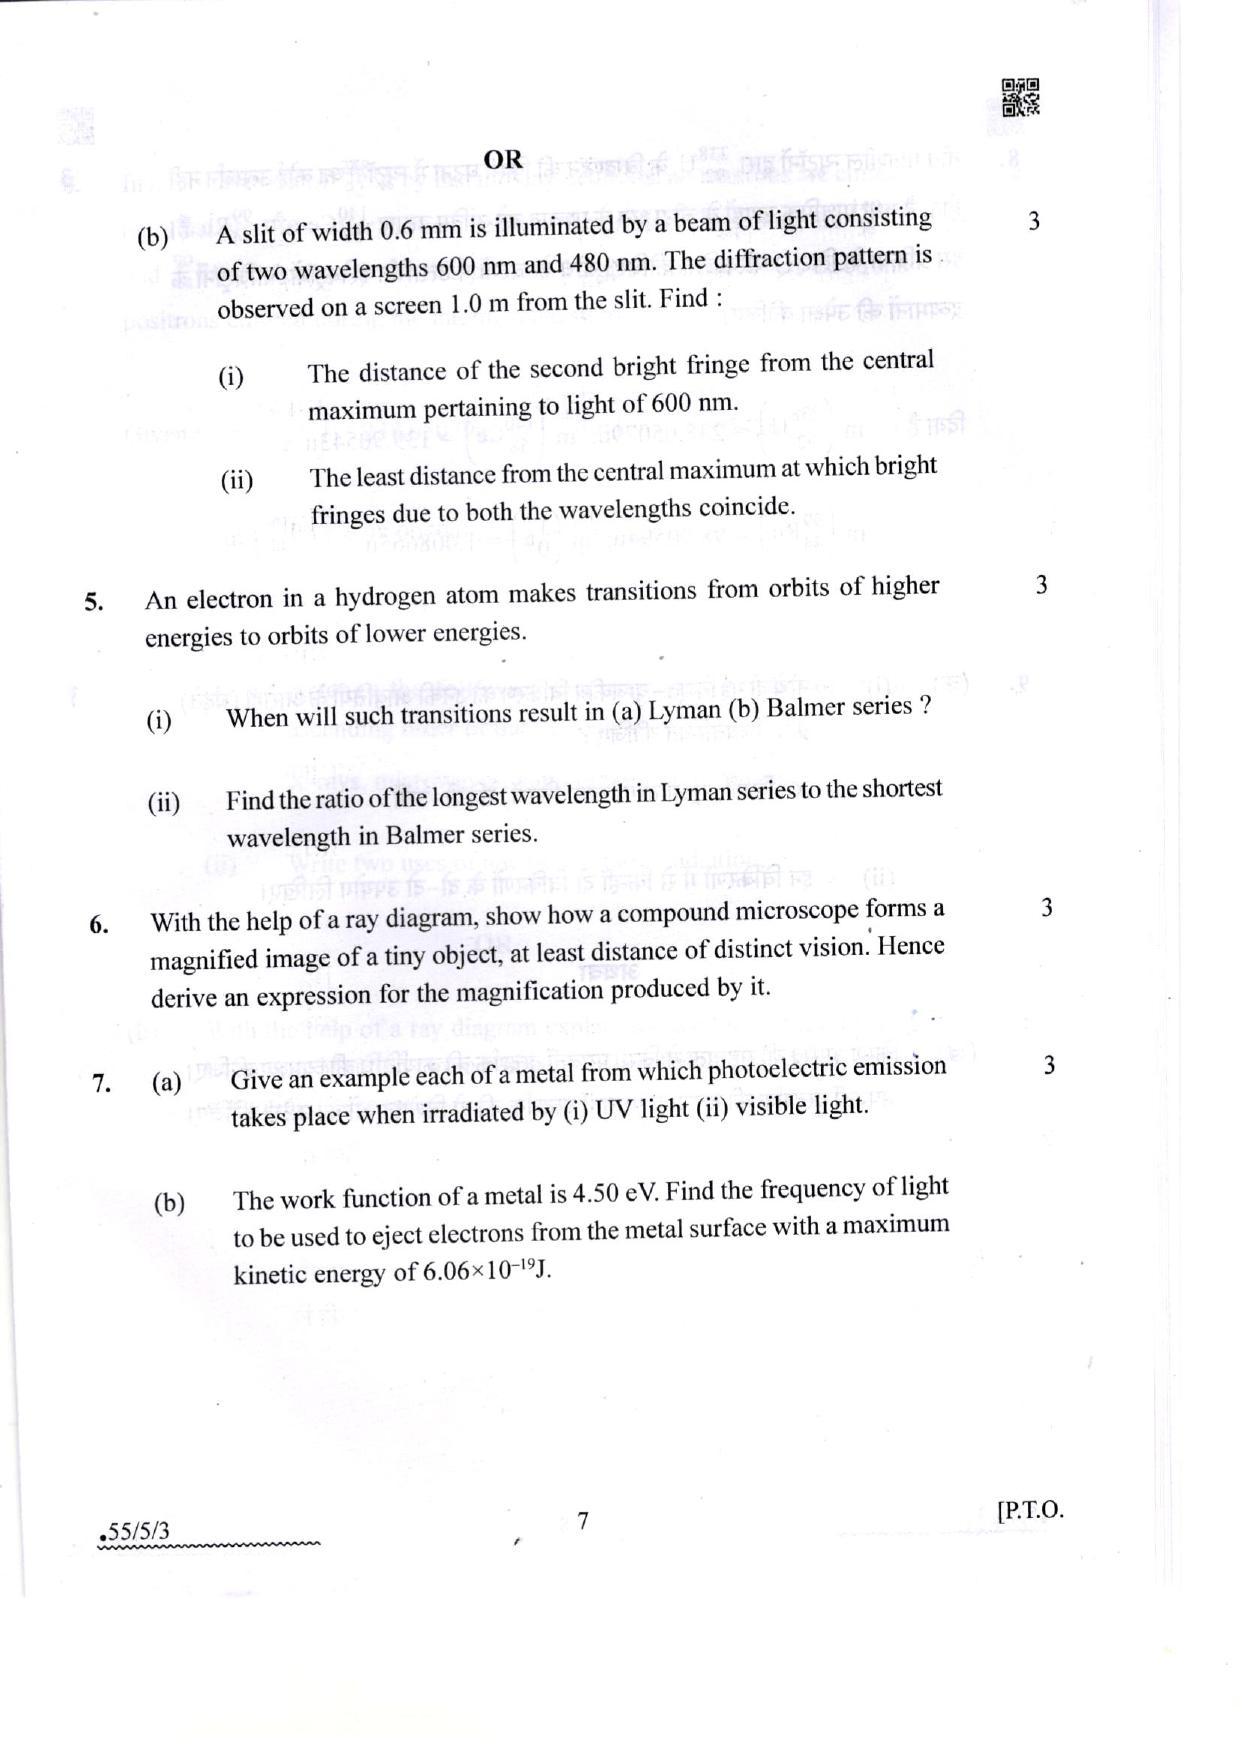 CBSE Class 12 55-5-3 Physics 2022 Question Paper - Page 7